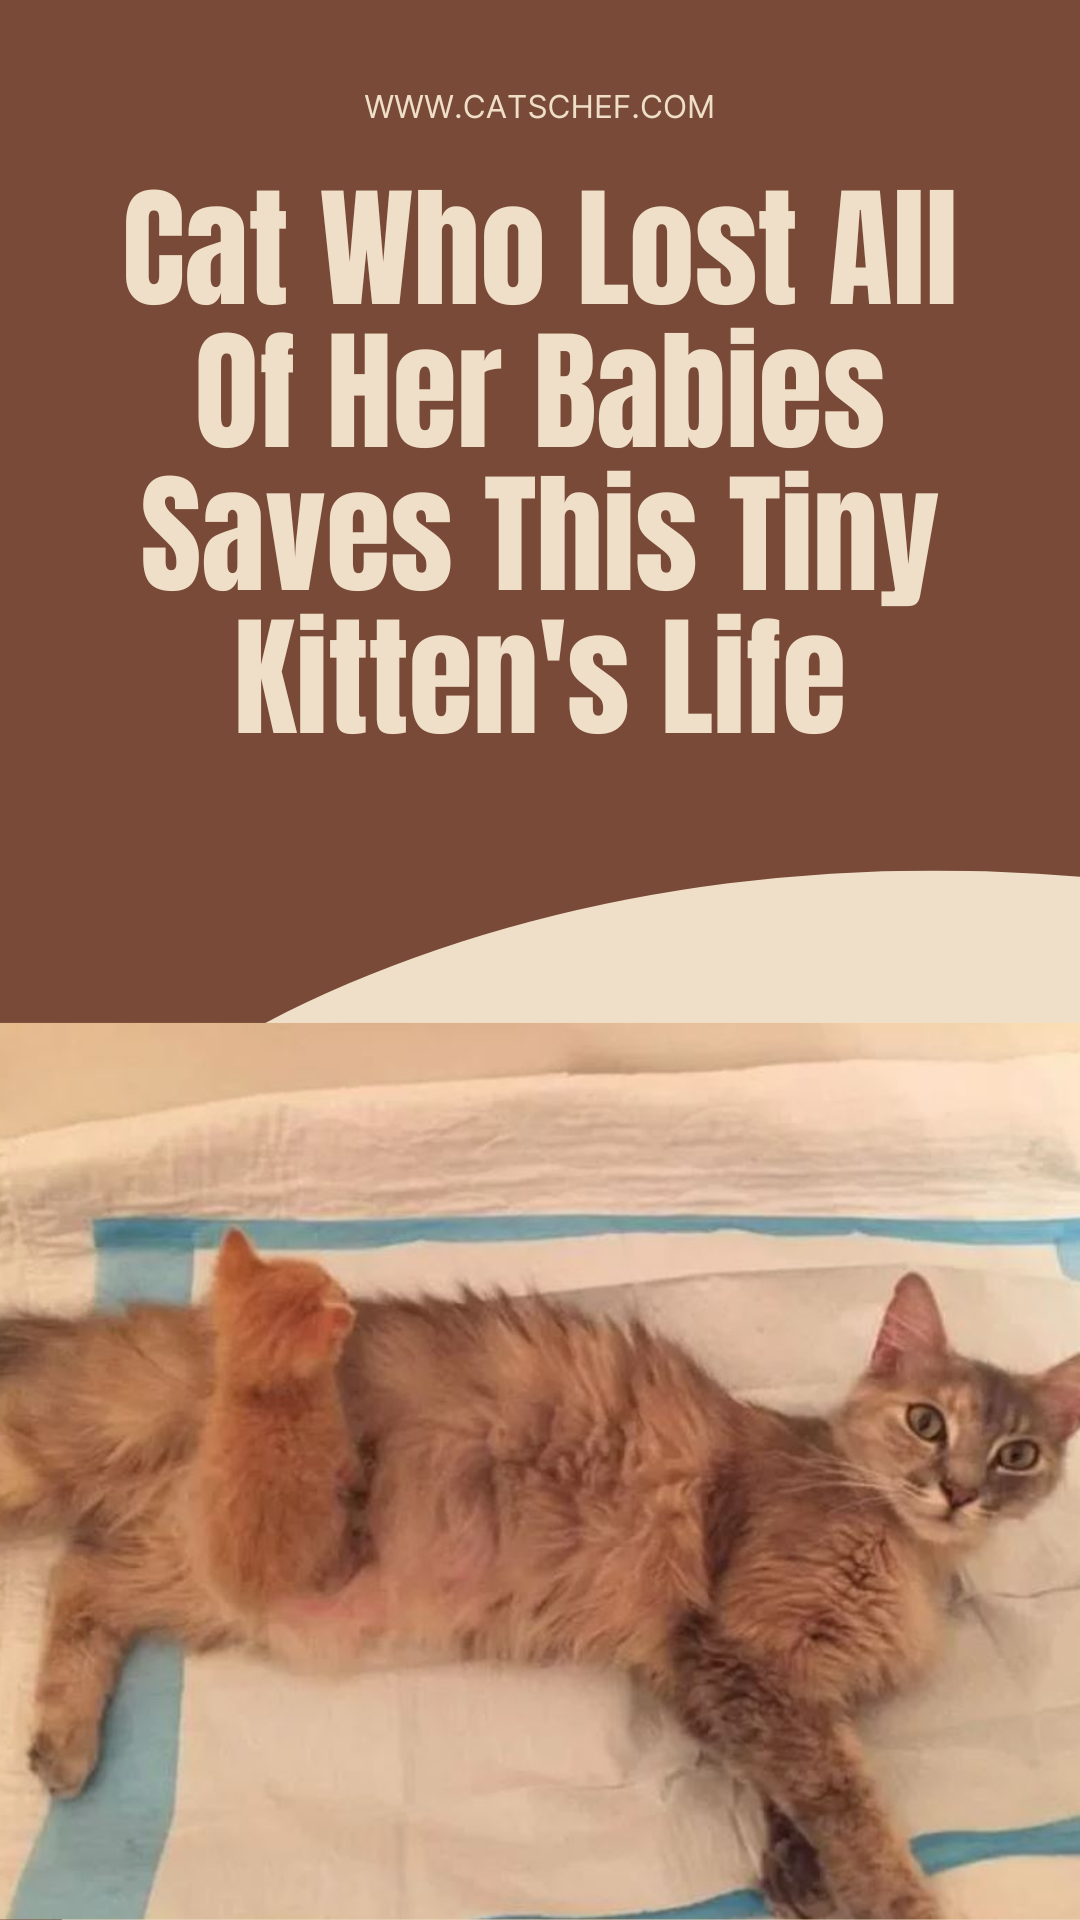 Cat Who Lost All Of Her Babies Saves This Tiny Kitten's Life